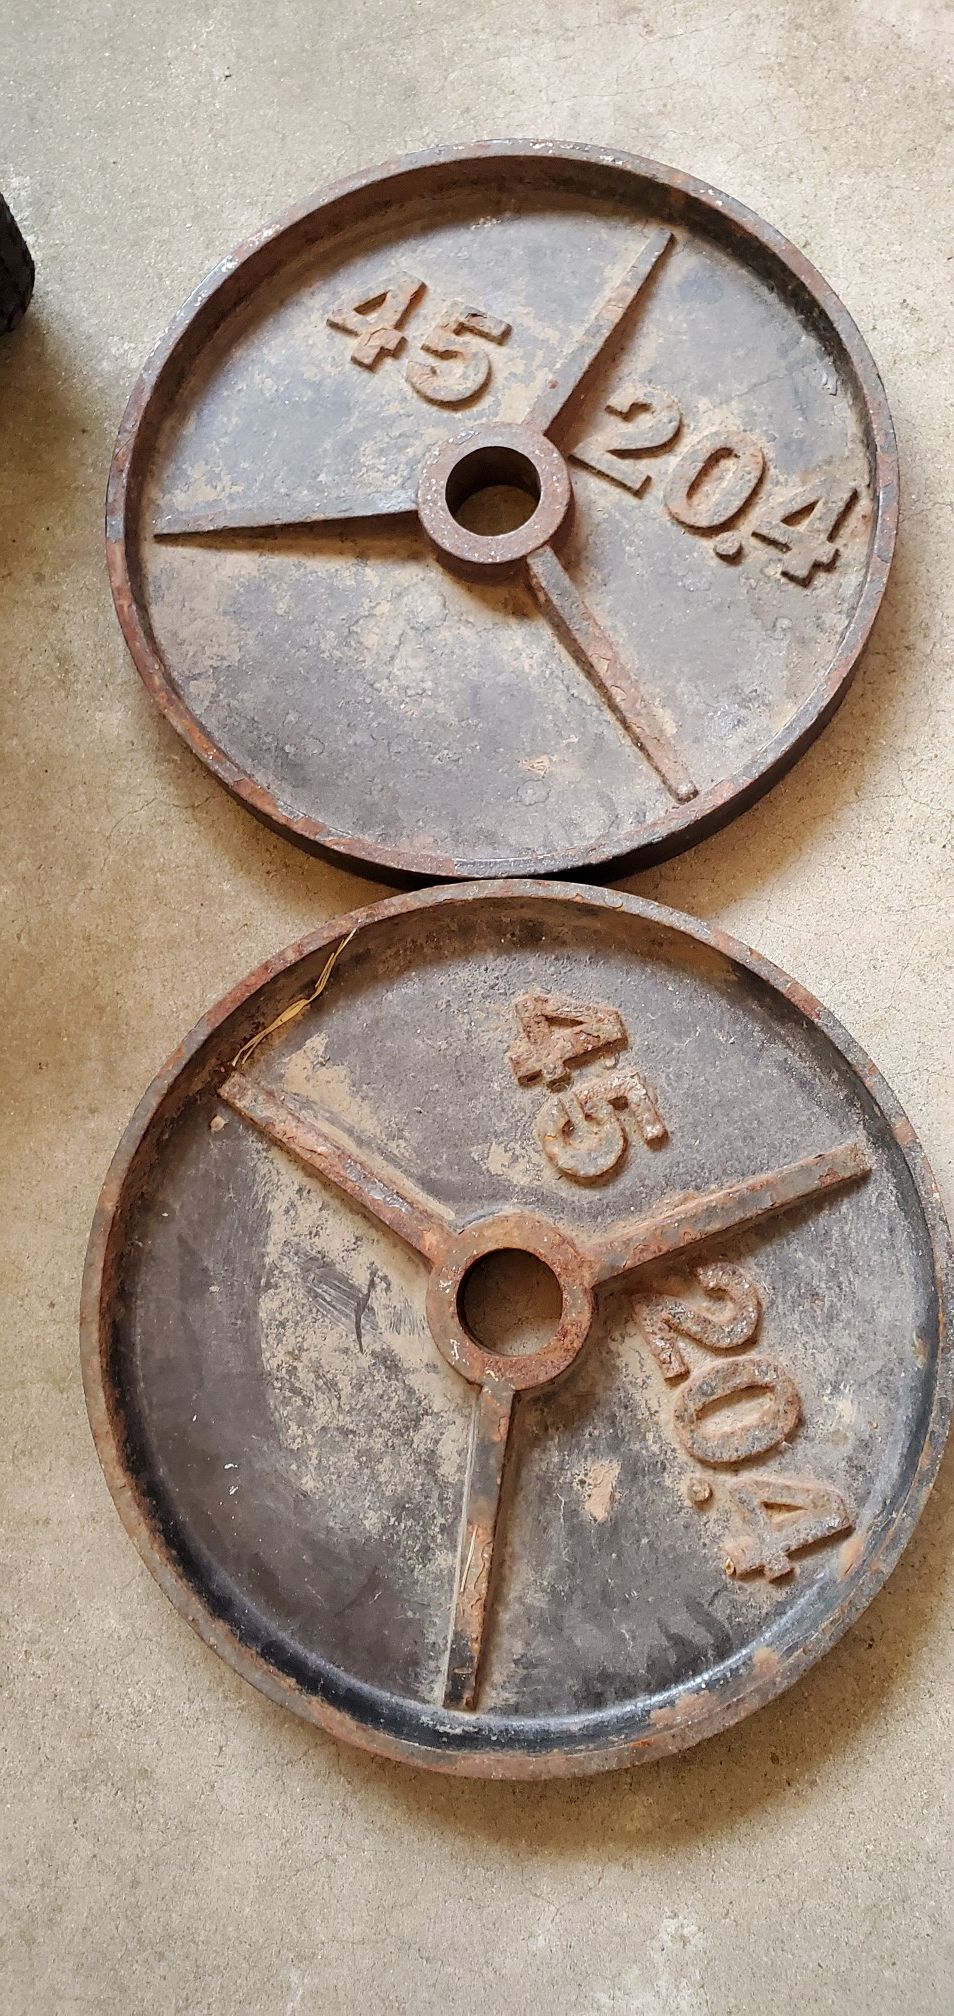 Pair of 45lb and 35lb Olympic weight plates